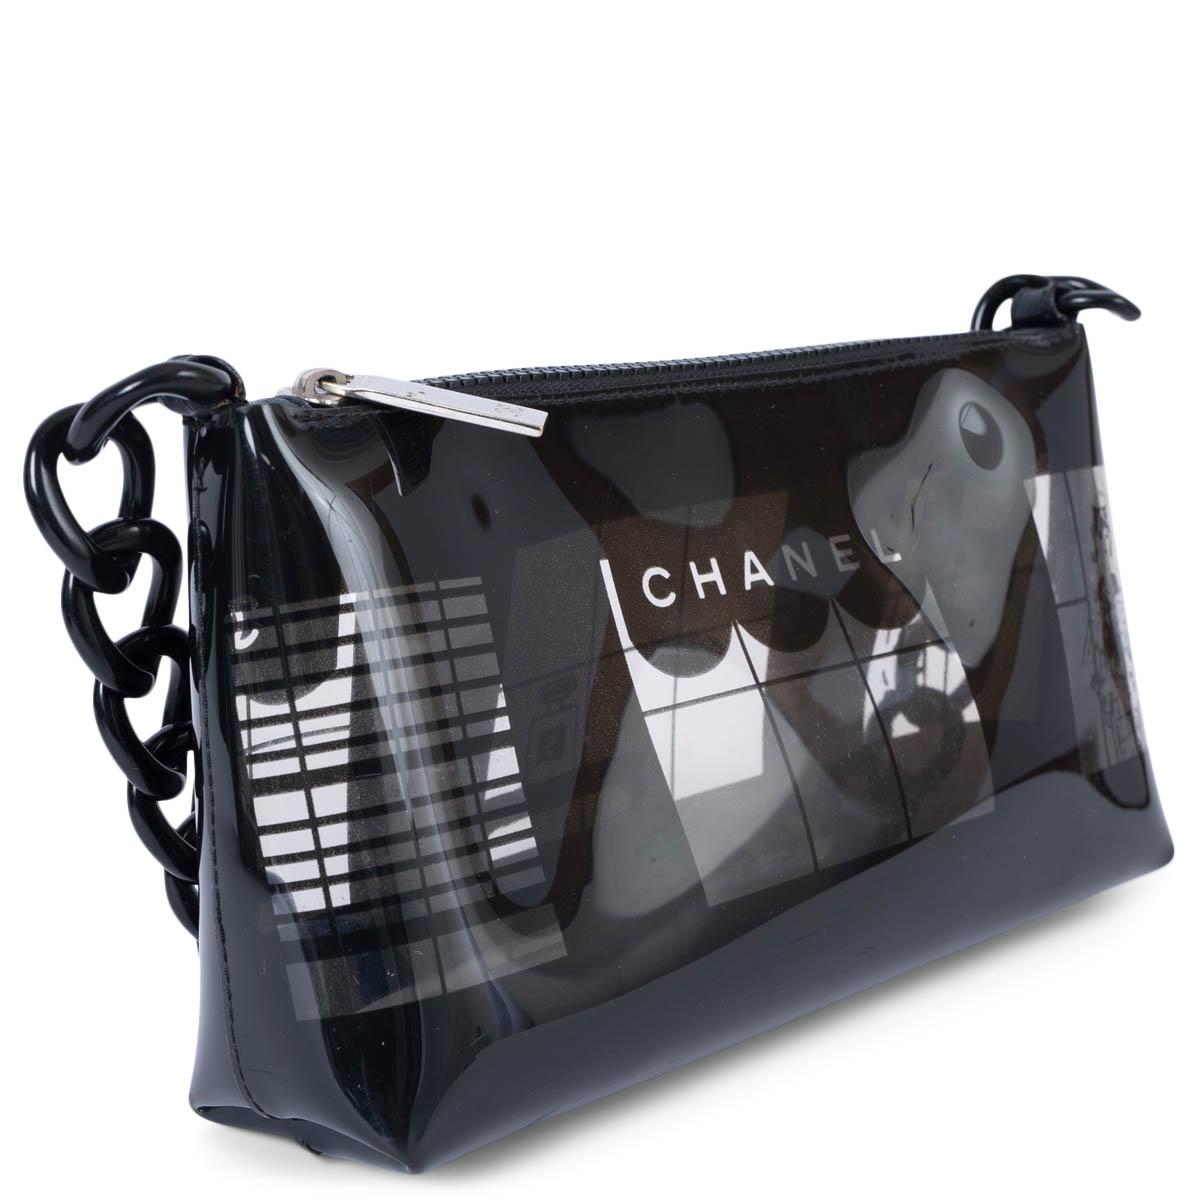 100% authentic Chanel clear and black vinyl Coco Window pochette. Opens with a zipper on top and features a black plastic chain strap and whimsical window scene design. Unlined. Comes with inside pouch. Has been carried and is in excellent